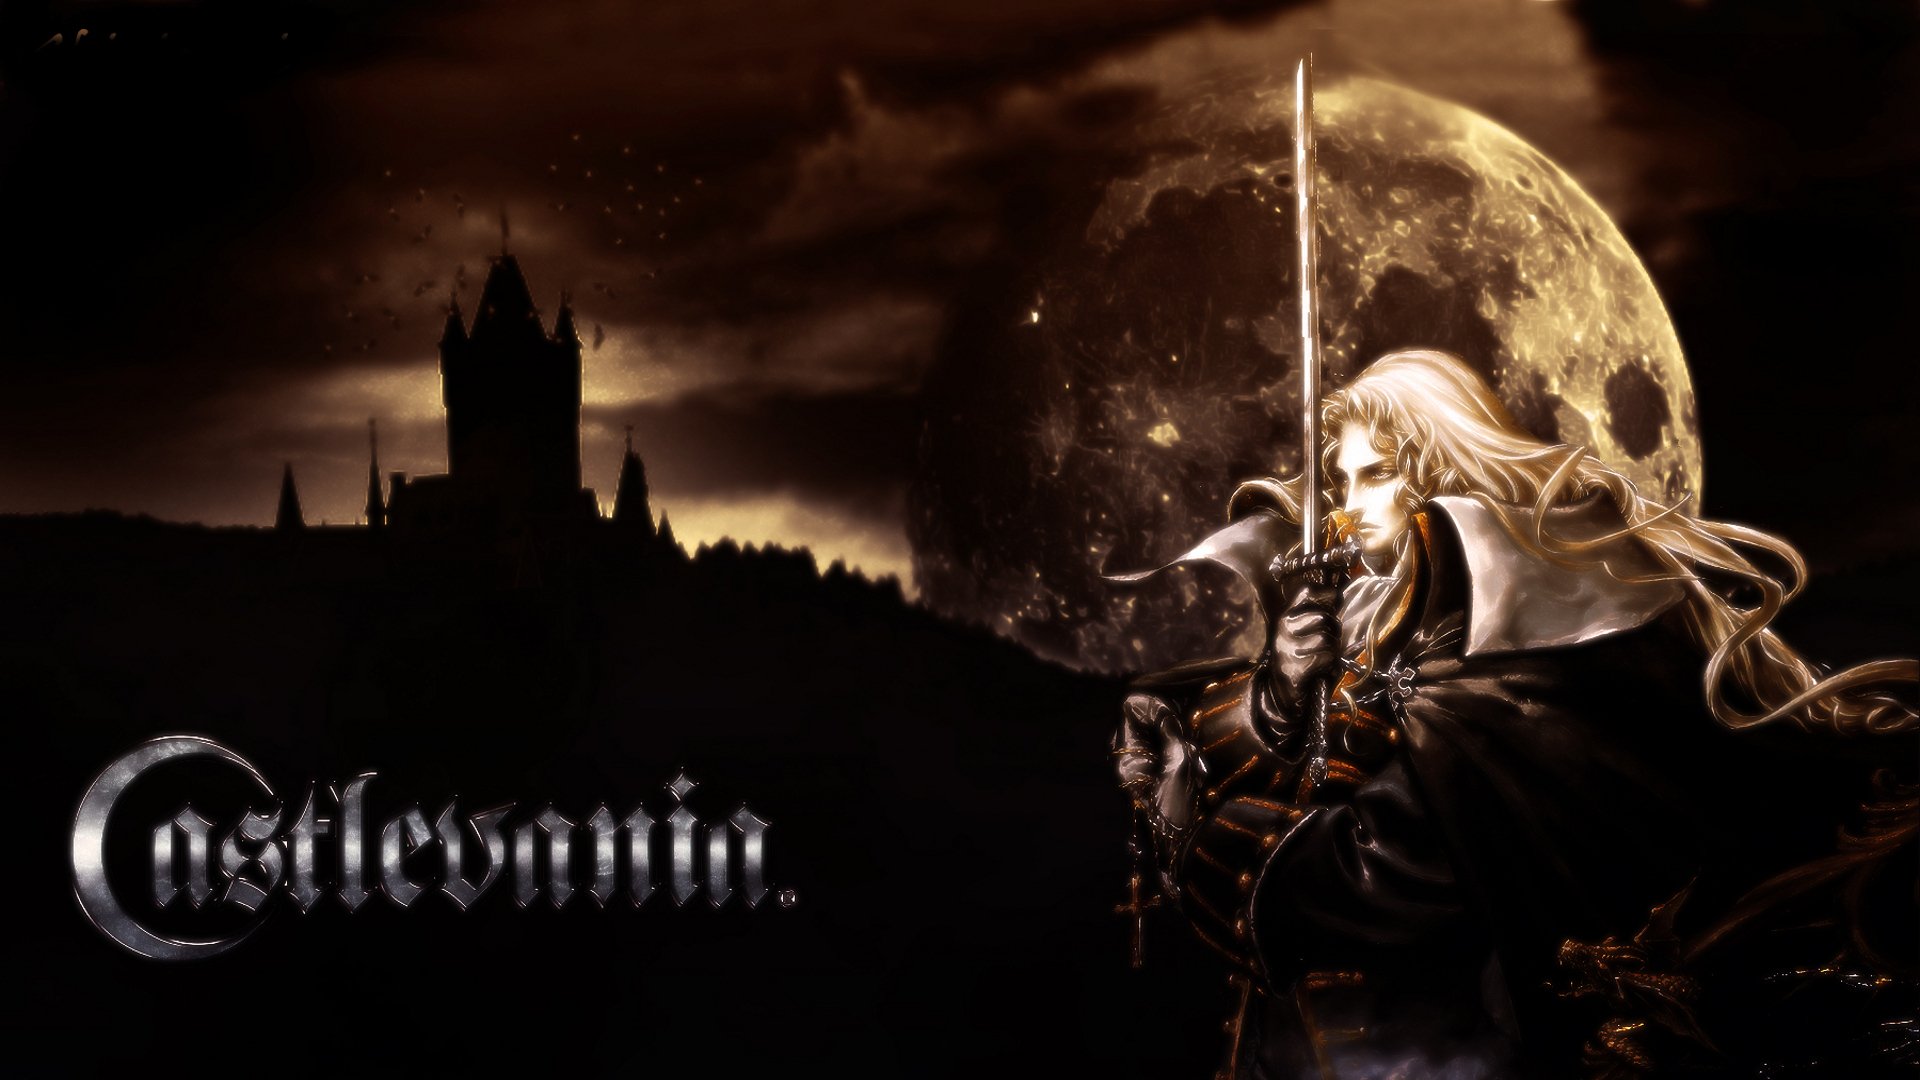 castlevania the bloodletting download pc